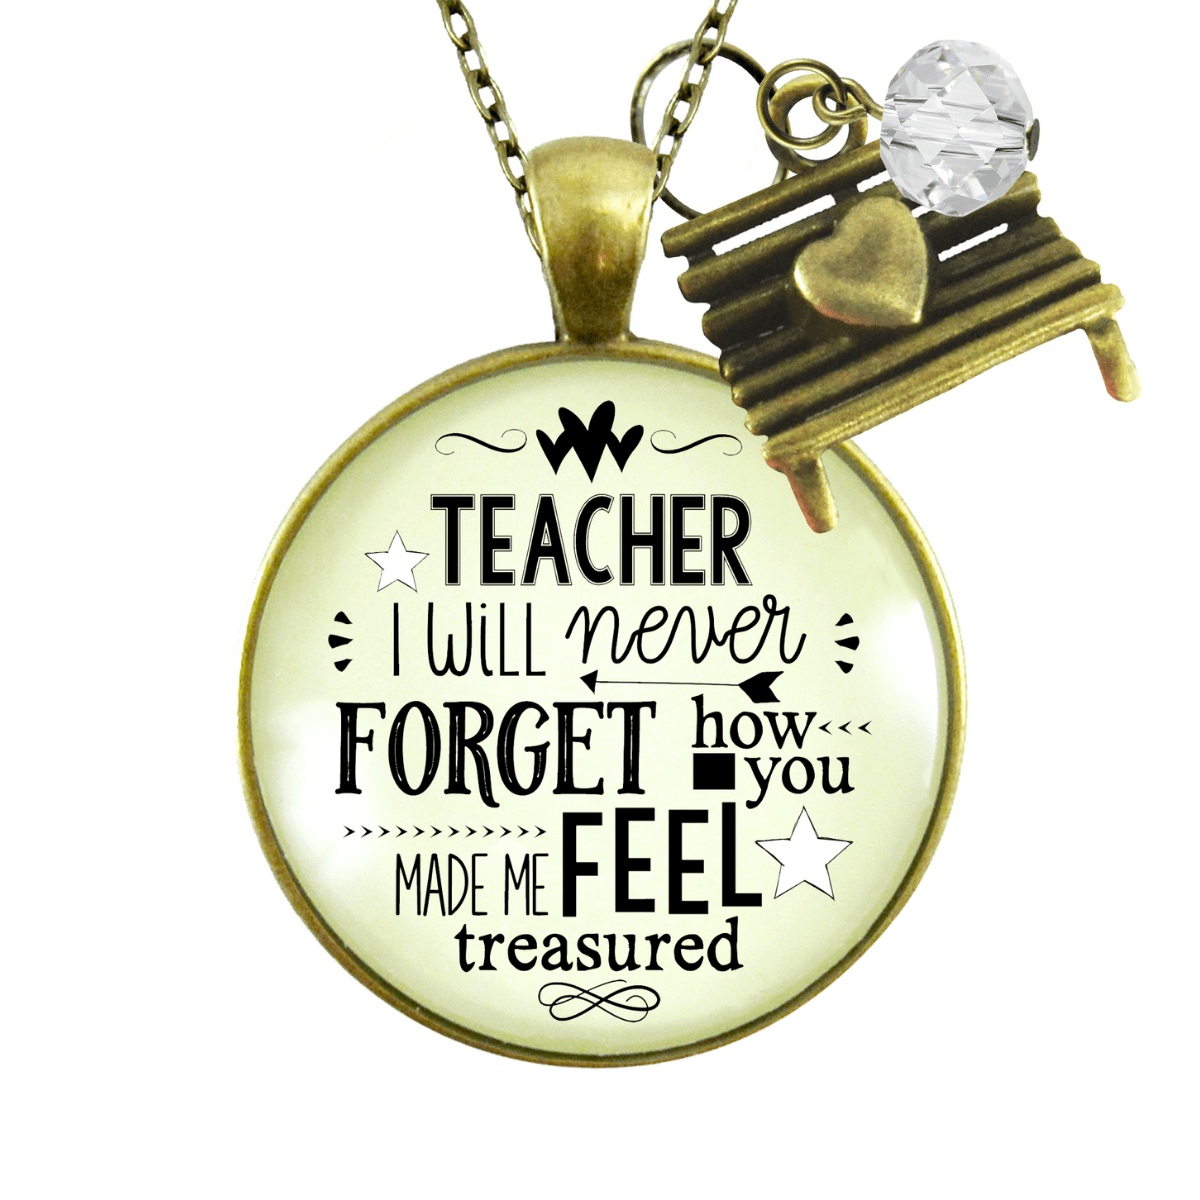 Gutsy Goodness Teacher Necklace I Will Never Forget Jewelry Appreciation Gift - Gutsy Goodness Handmade Jewelry;Teacher Necklace I Will Never Forget Jewelry Appreciation Gift - Gutsy Goodness Handmade Jewelry Gifts